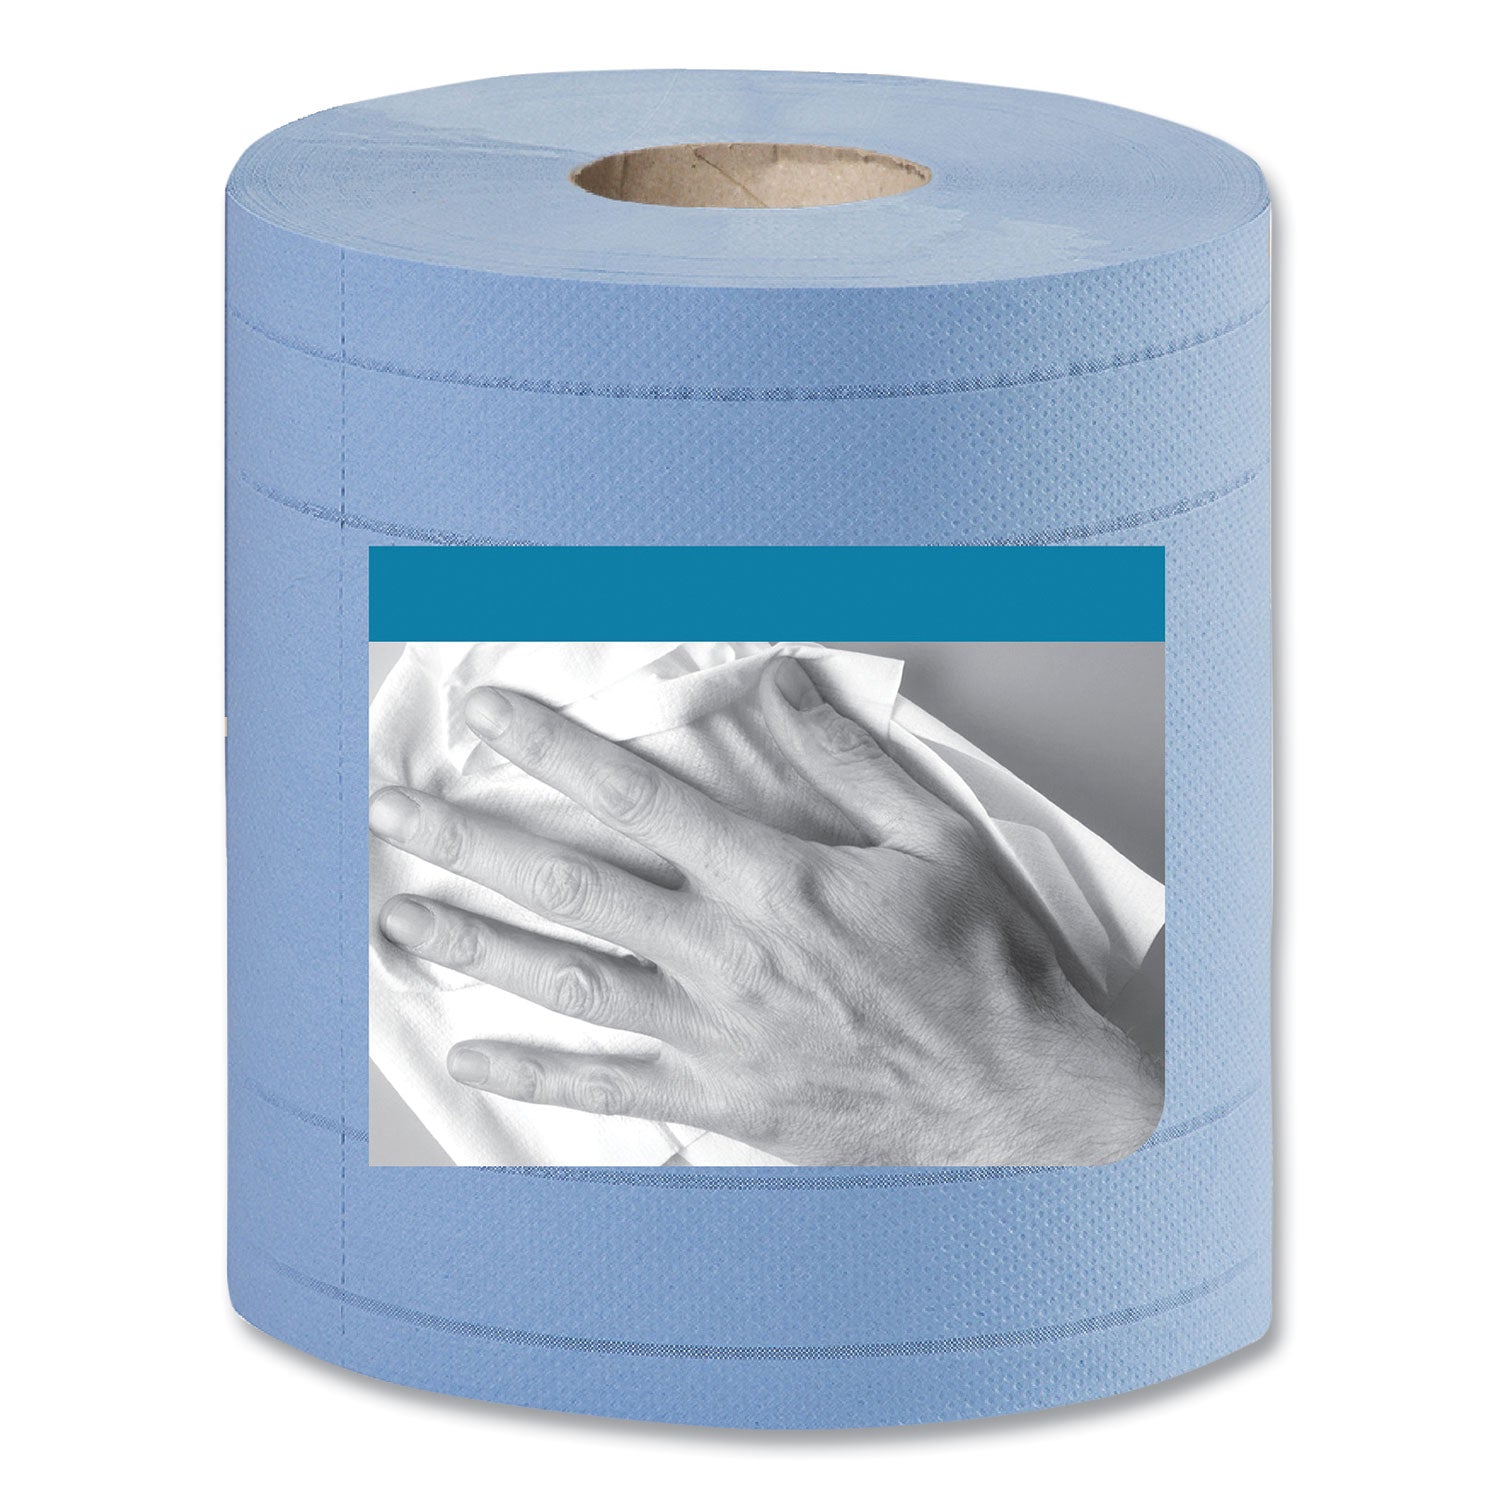 industrial-paper-wiper-4-ply-11-x-1575-unscented-blue-375-wipes-roll-2-rolls-carton_trk13244101 - 1